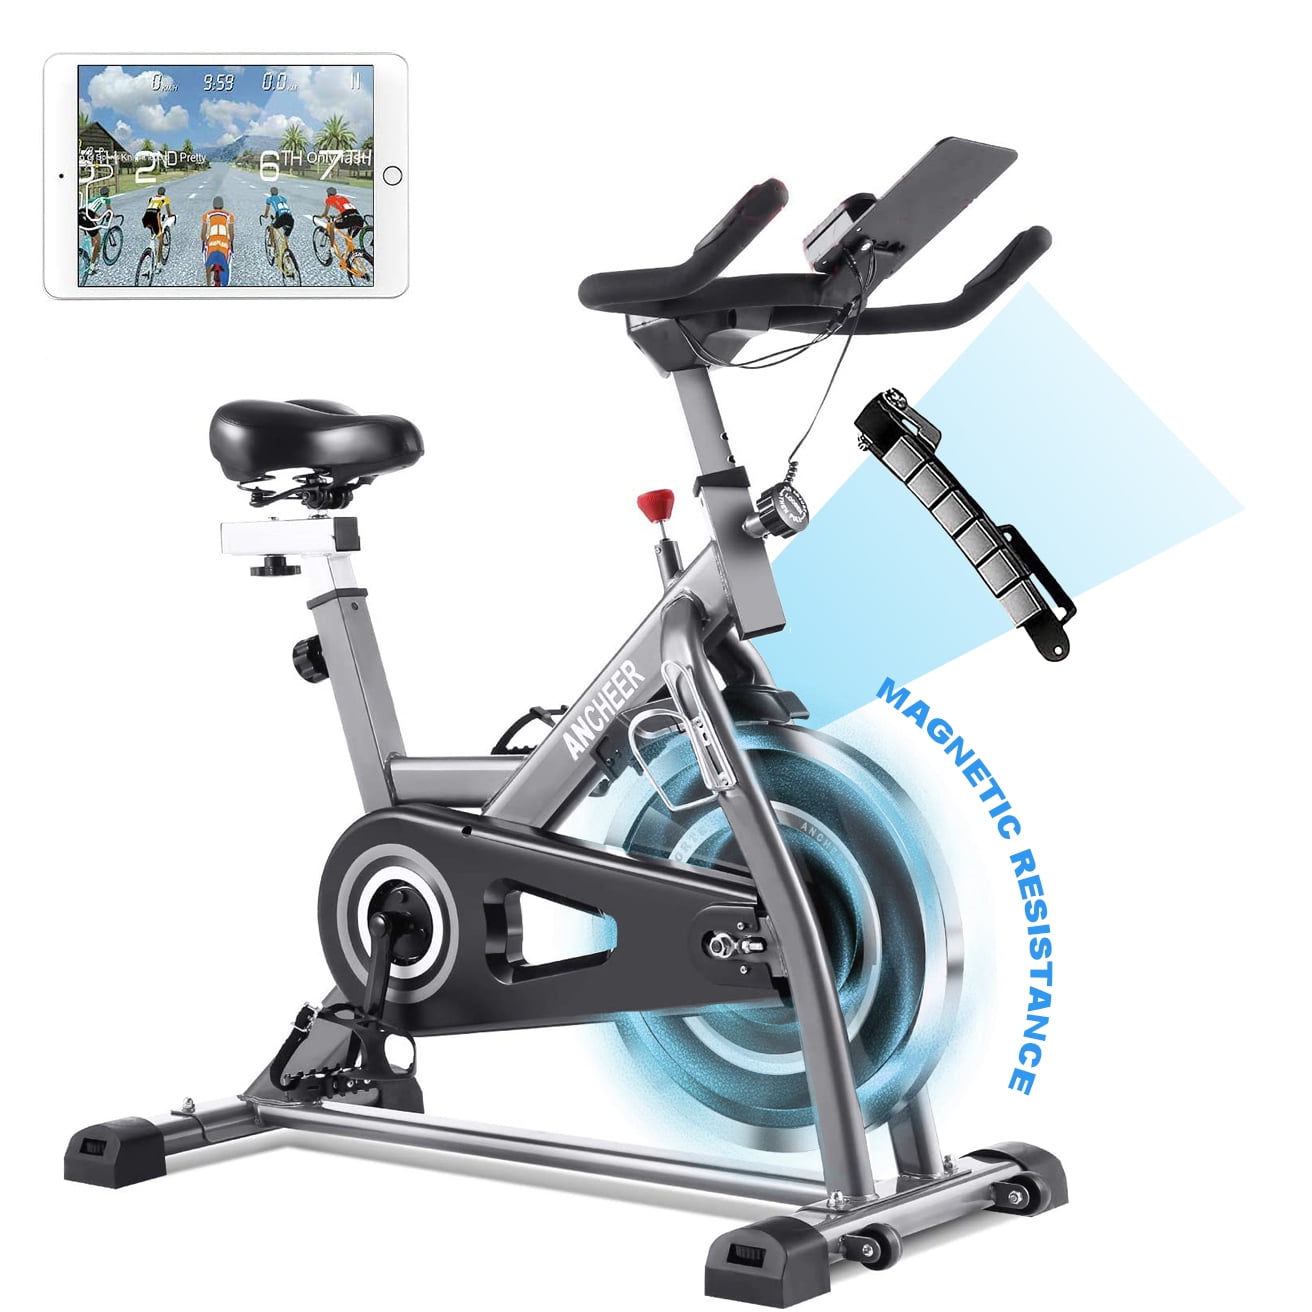 Details about   Exercise Stationary Bicycle Cycling Fitness Gym Bike Cardio Workout Bicycle Blue 